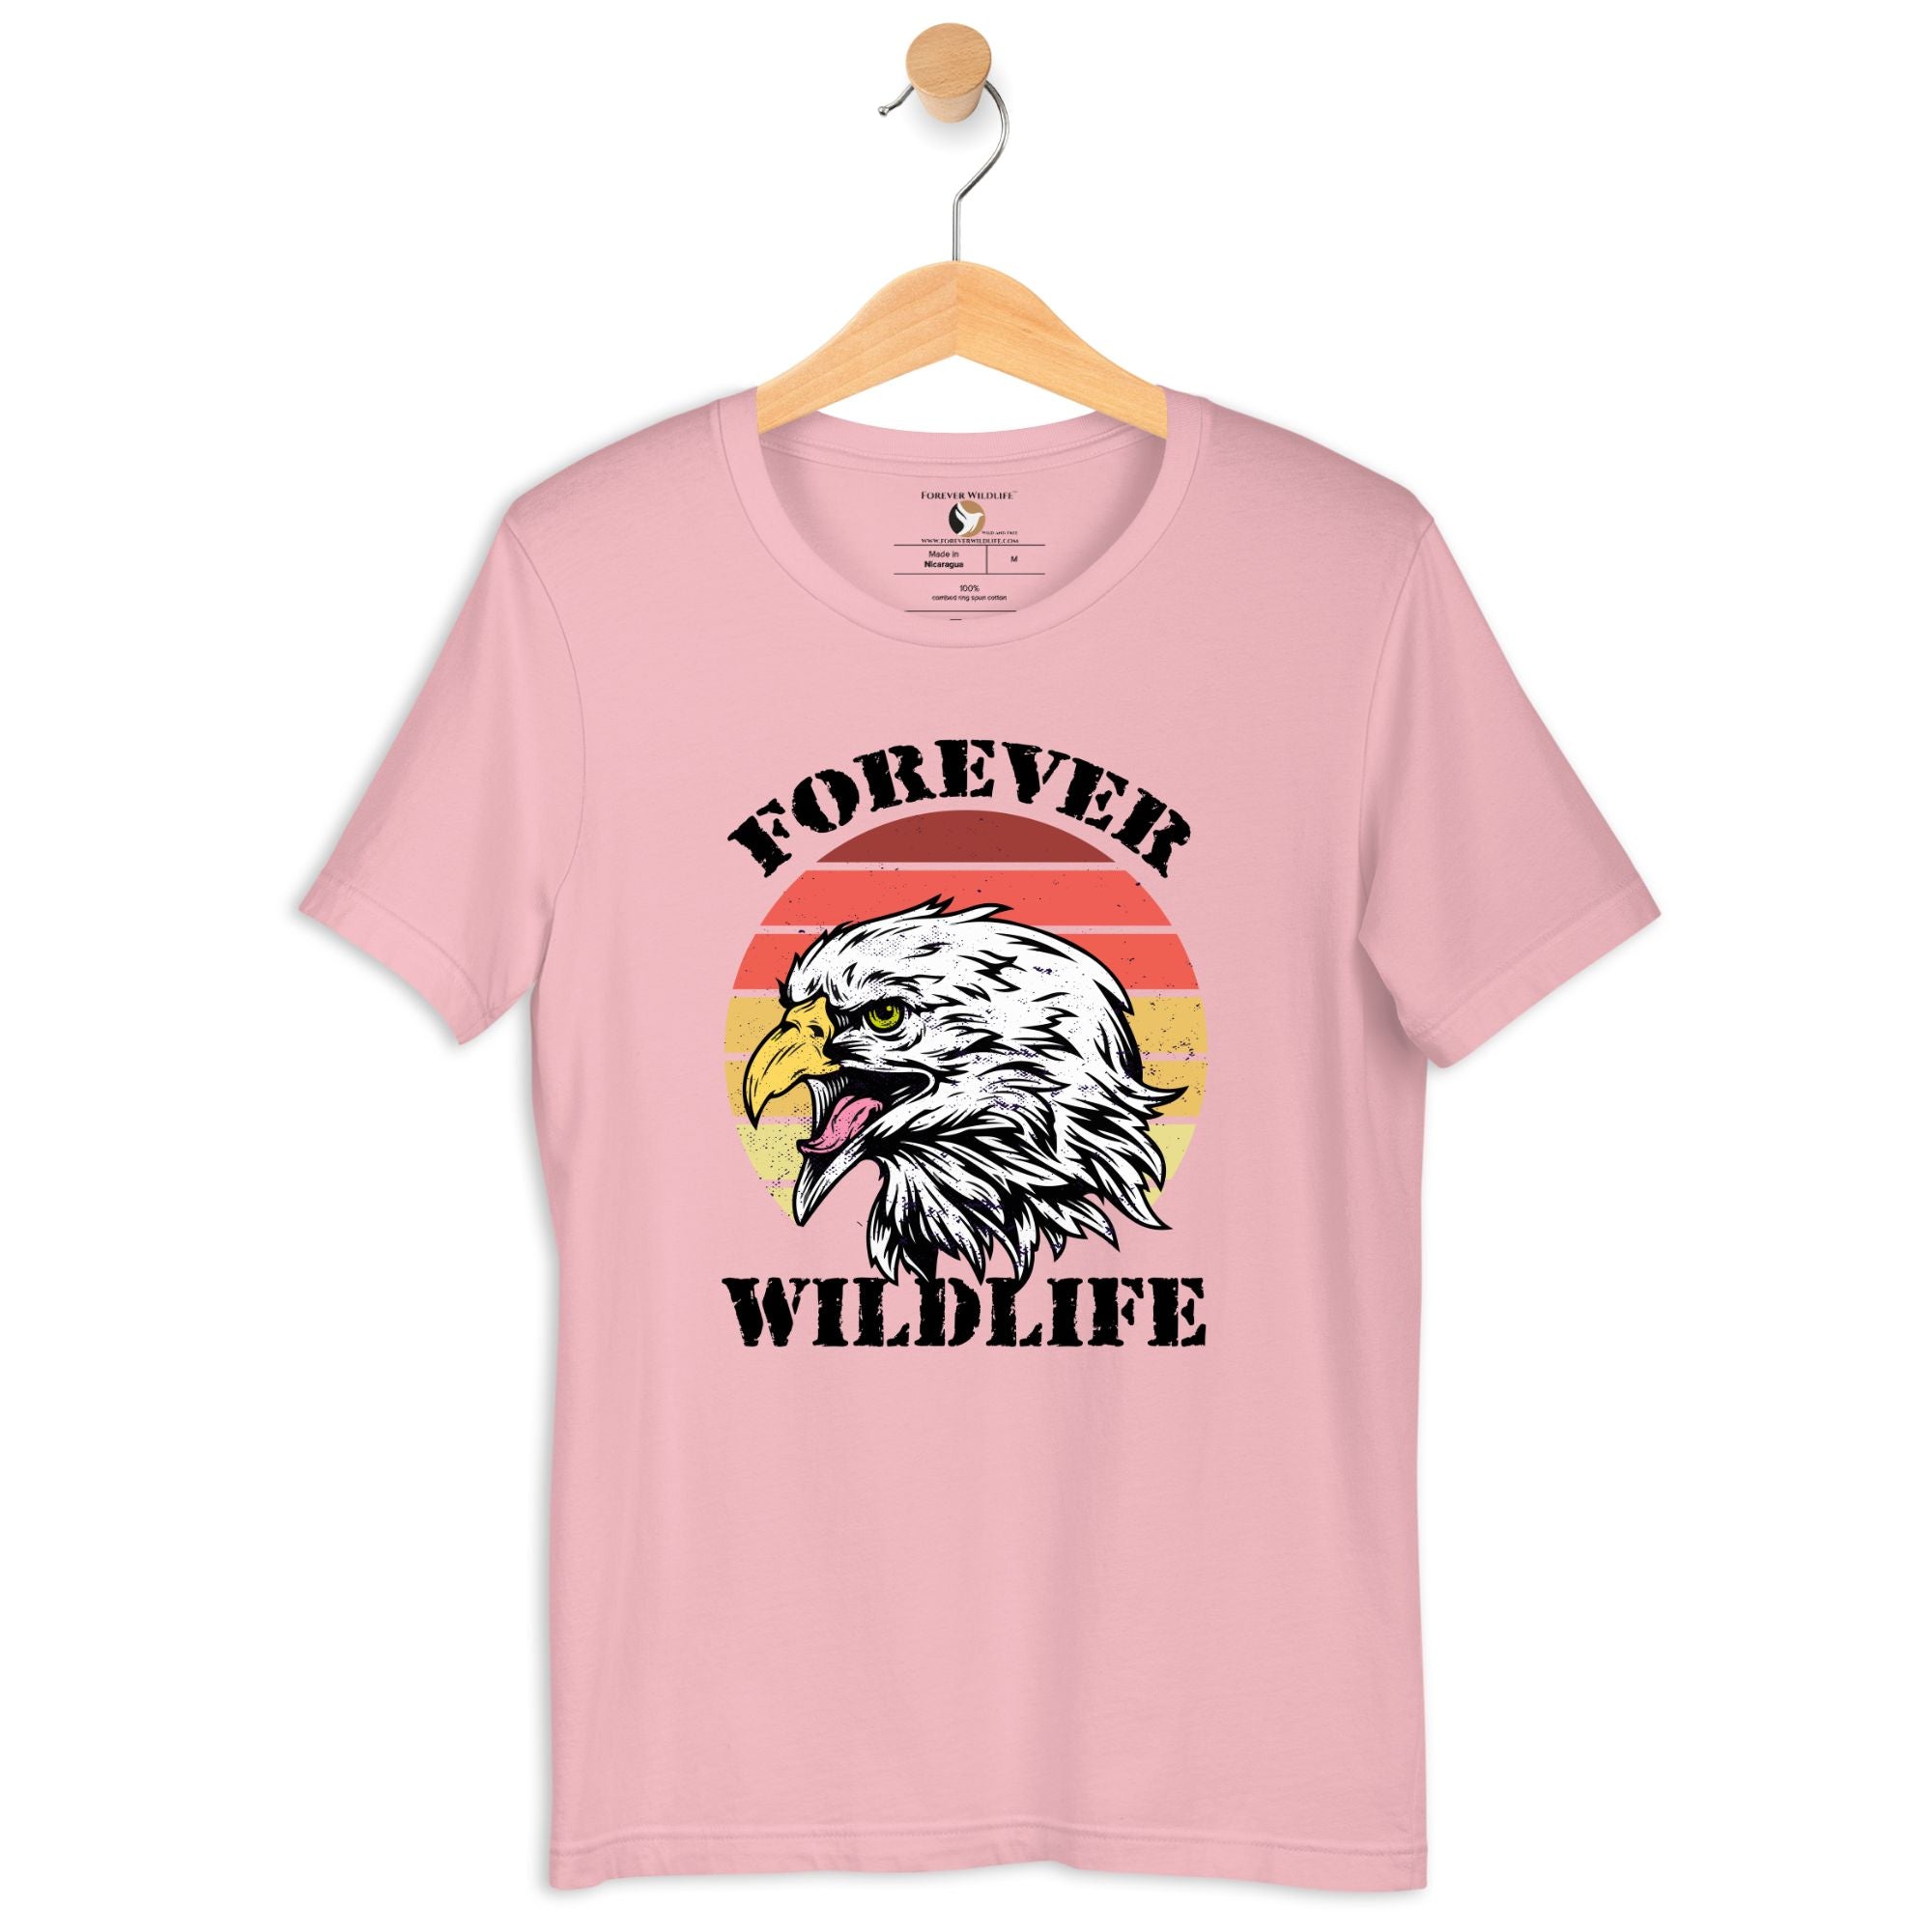 Eagle T-Shirt in Pink – Premium Wildlife T-Shirt Design, Eagle Shirts and Wildlife Clothing from Forever Wildlife